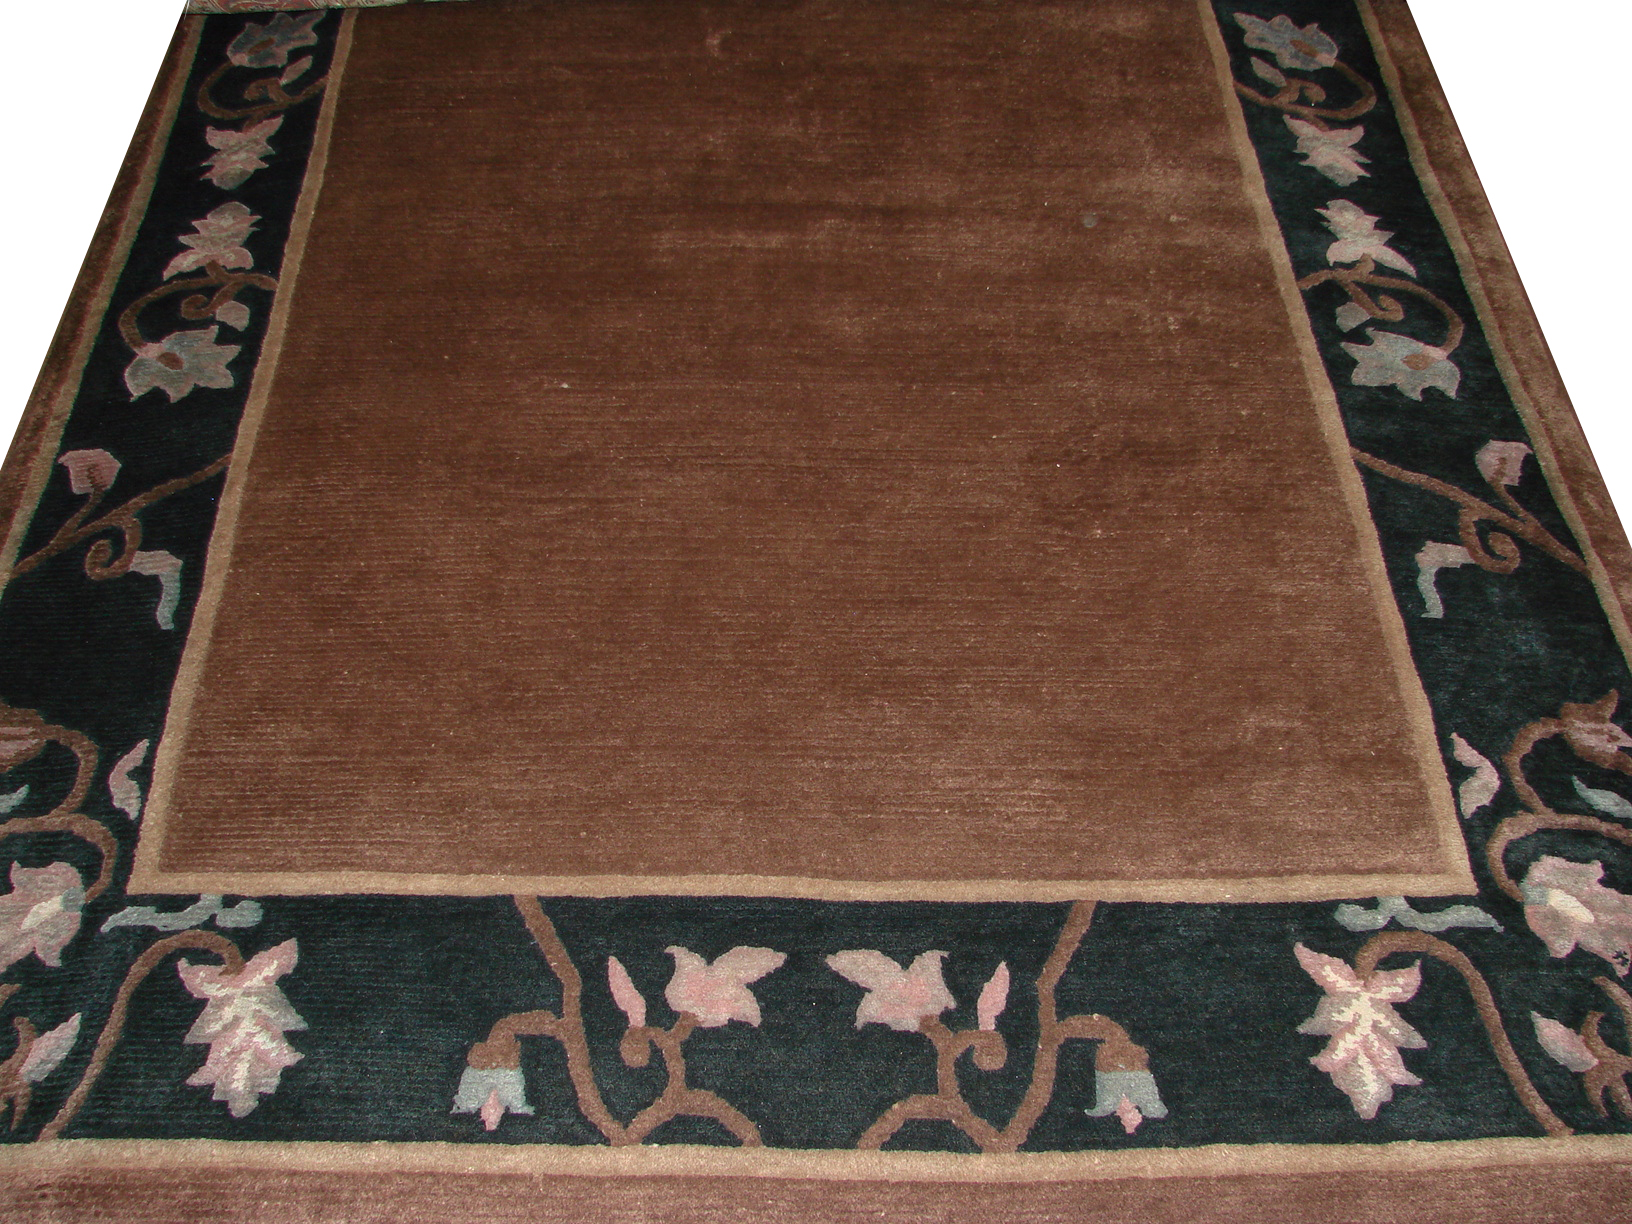 Clearance & Discount Rugs Indo-Tibet 02833 Lt. Brown - Chocolate & Black - Charcoal Hand Knotted Rug